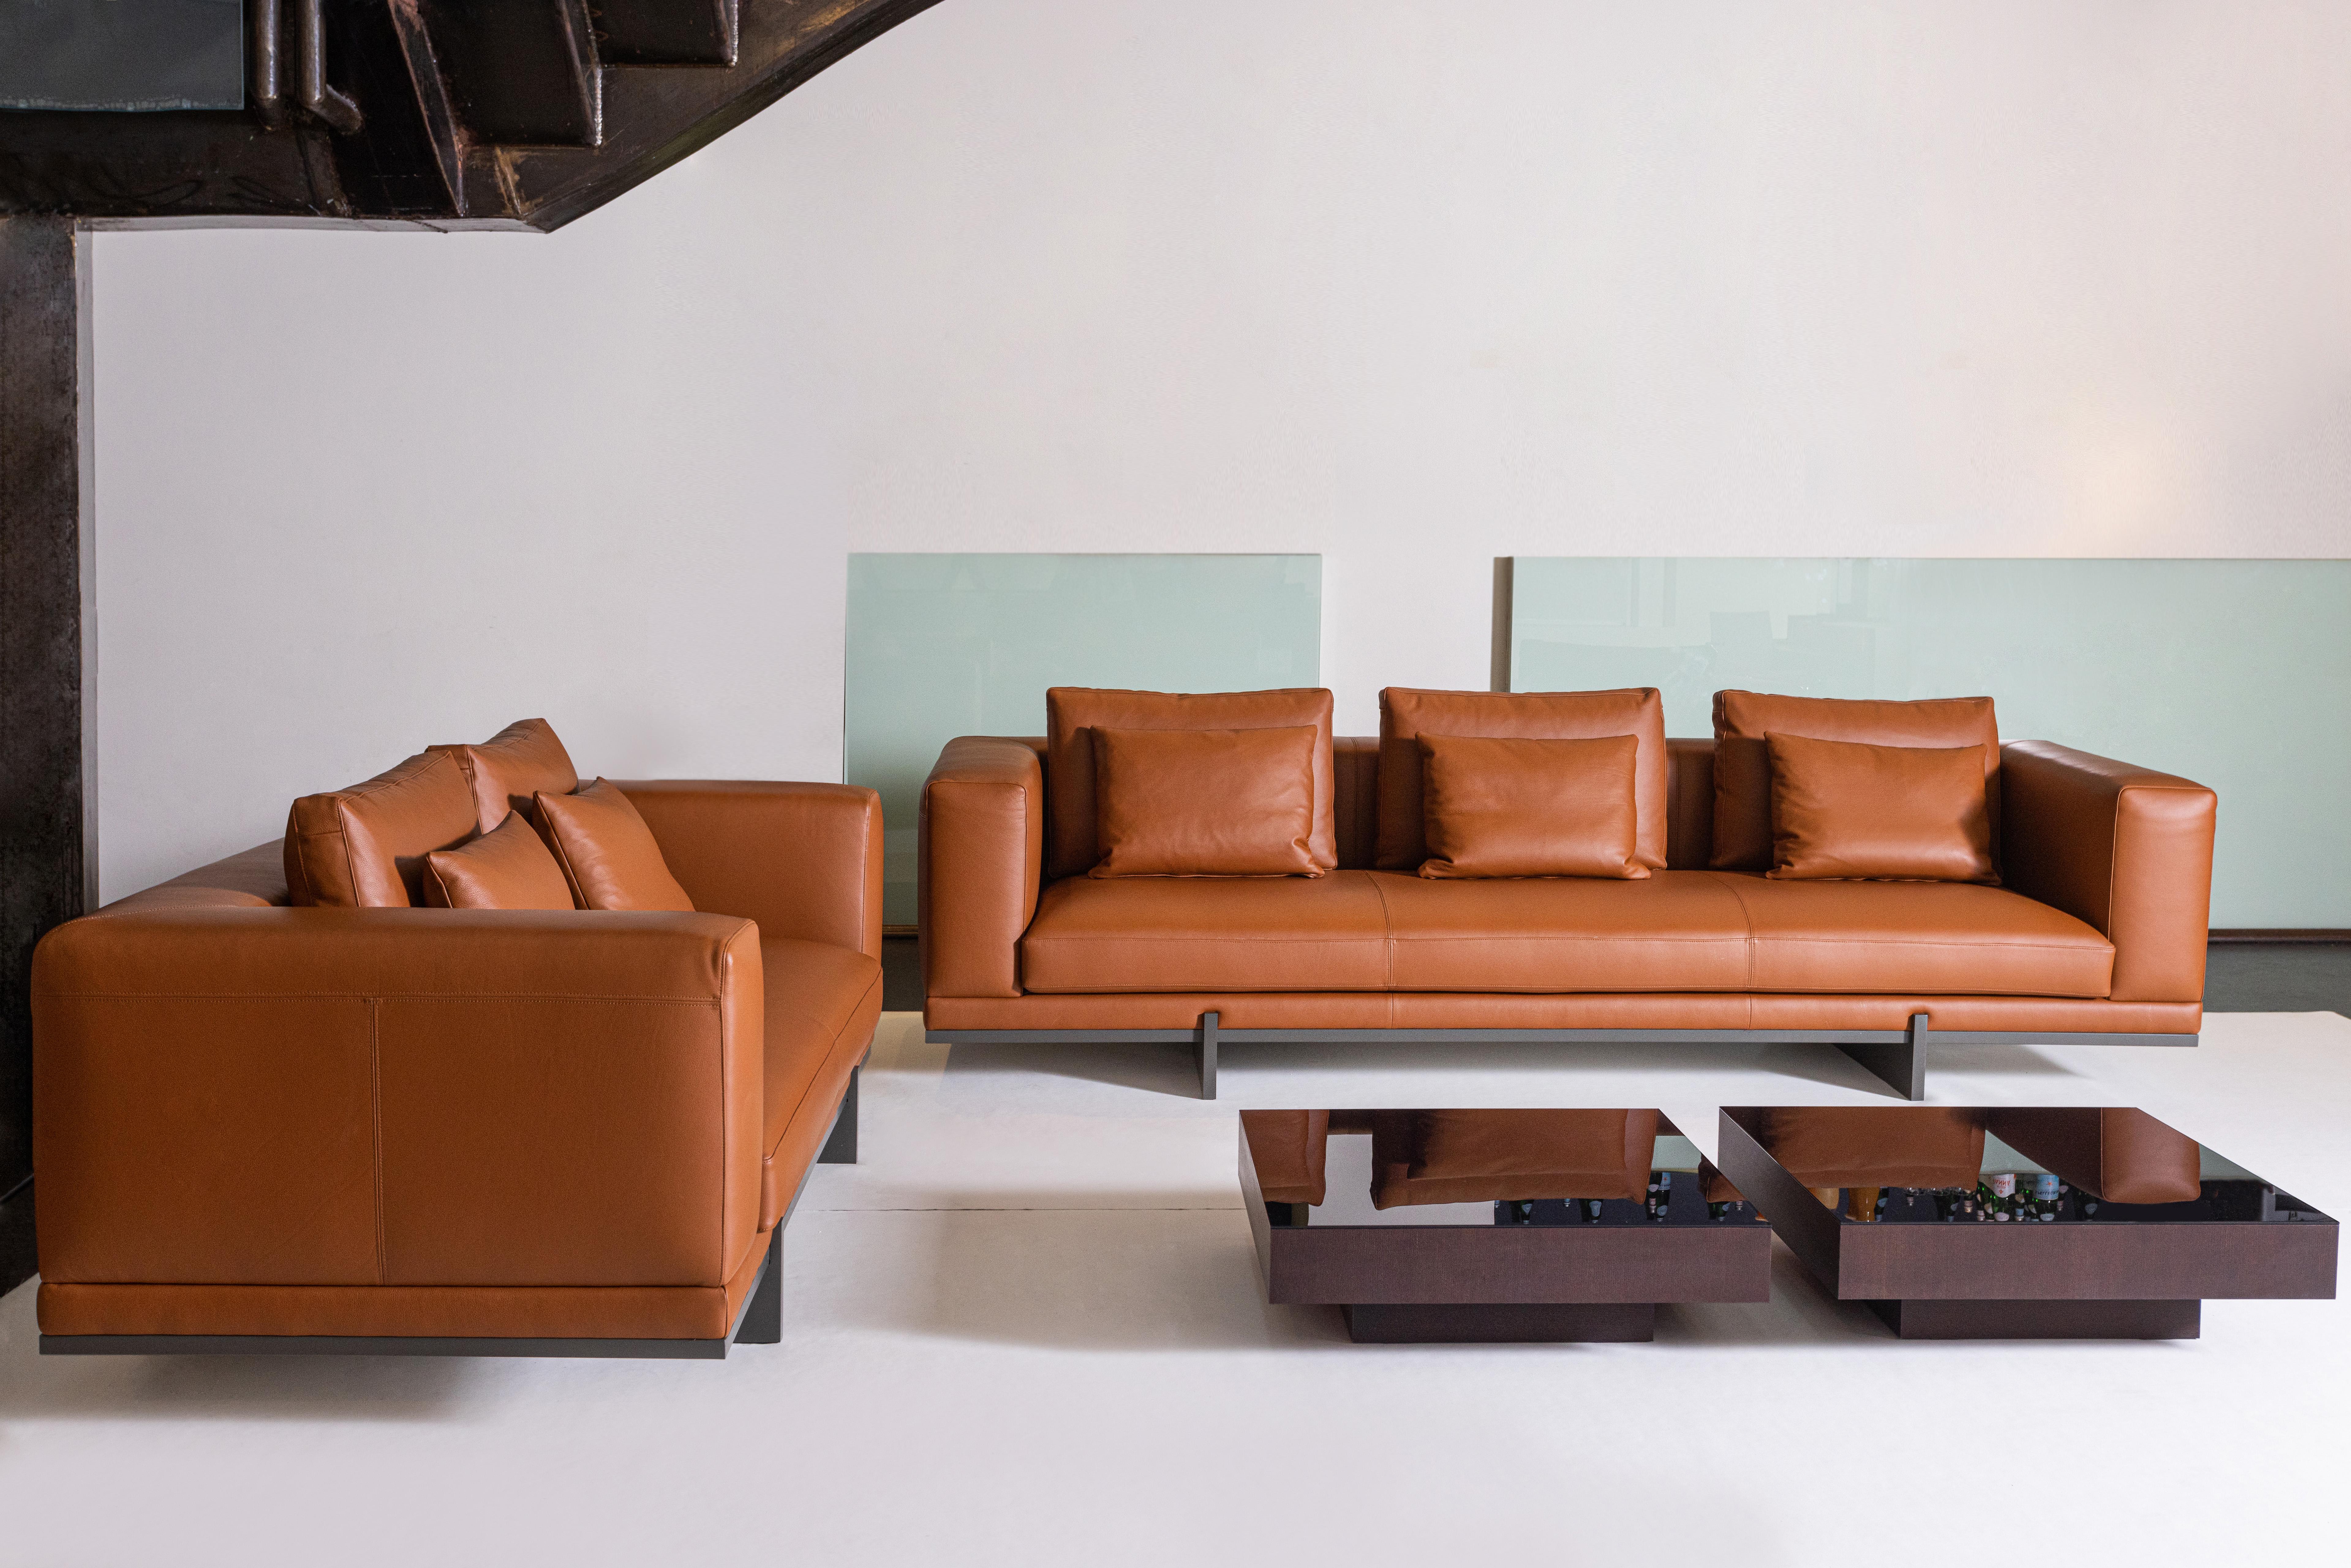 Designed by Brazilian designer Ricardo Antonio, a student of Oscar Niemeyer, the DOVE sofa is distinguished by its clean, linear forms in a perfect blend of aesthetics and comfort. The seat frame is made of solid wood with weft-mounted elastic